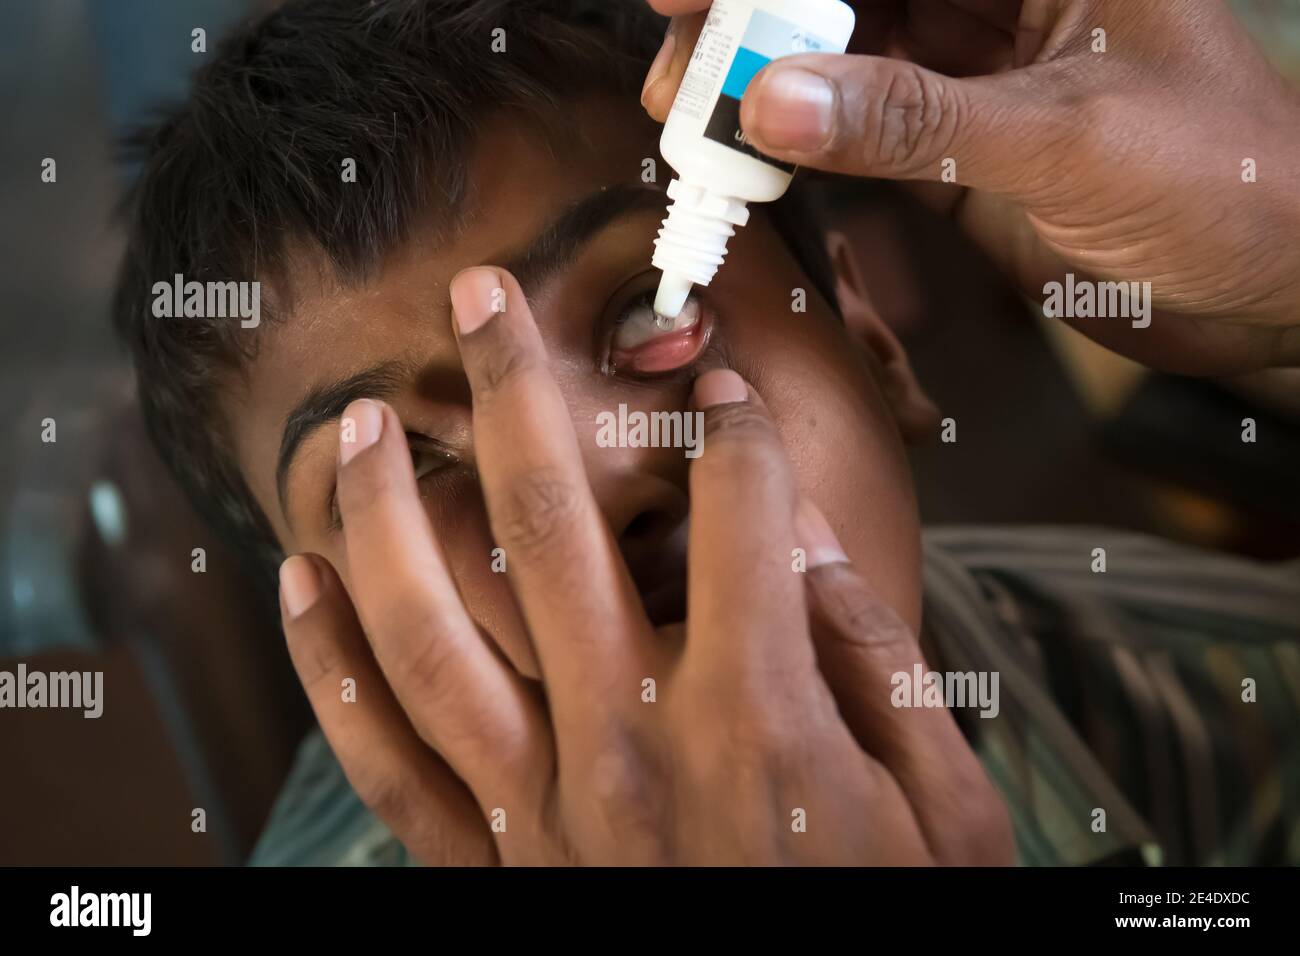 Rajasthan. India. 07-02-2018. Child receiving medical attention by doctor for a problem with his eyes. Stock Photo